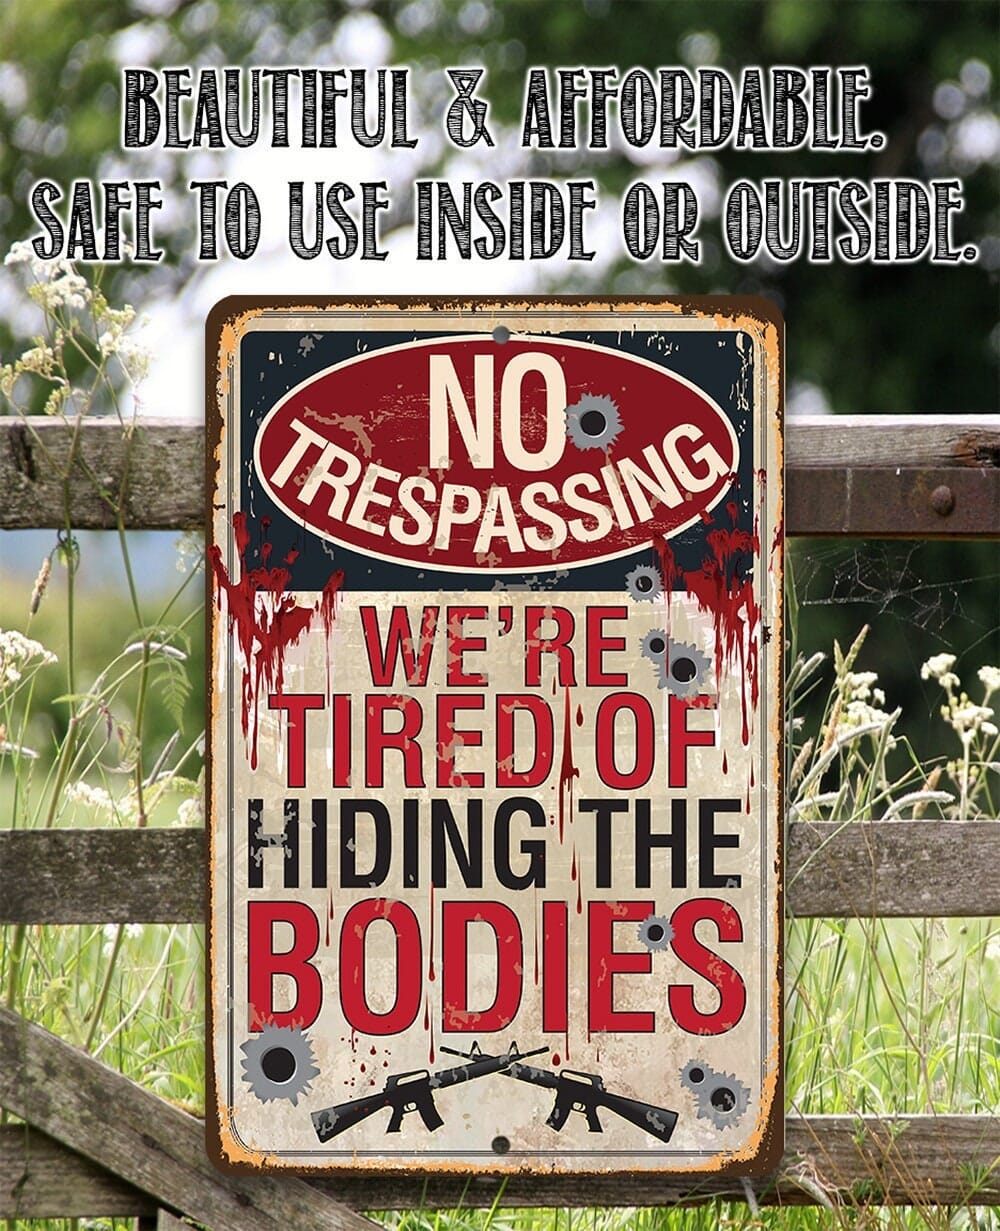 No Trespassing Tired of Hiding The Bodies-Fence, Bullet Hole, Gift for Gun Enthusiast, 8" x 12"/12" x 18" Aluminum Tin Awesome Metal Poster Lone Star Art 